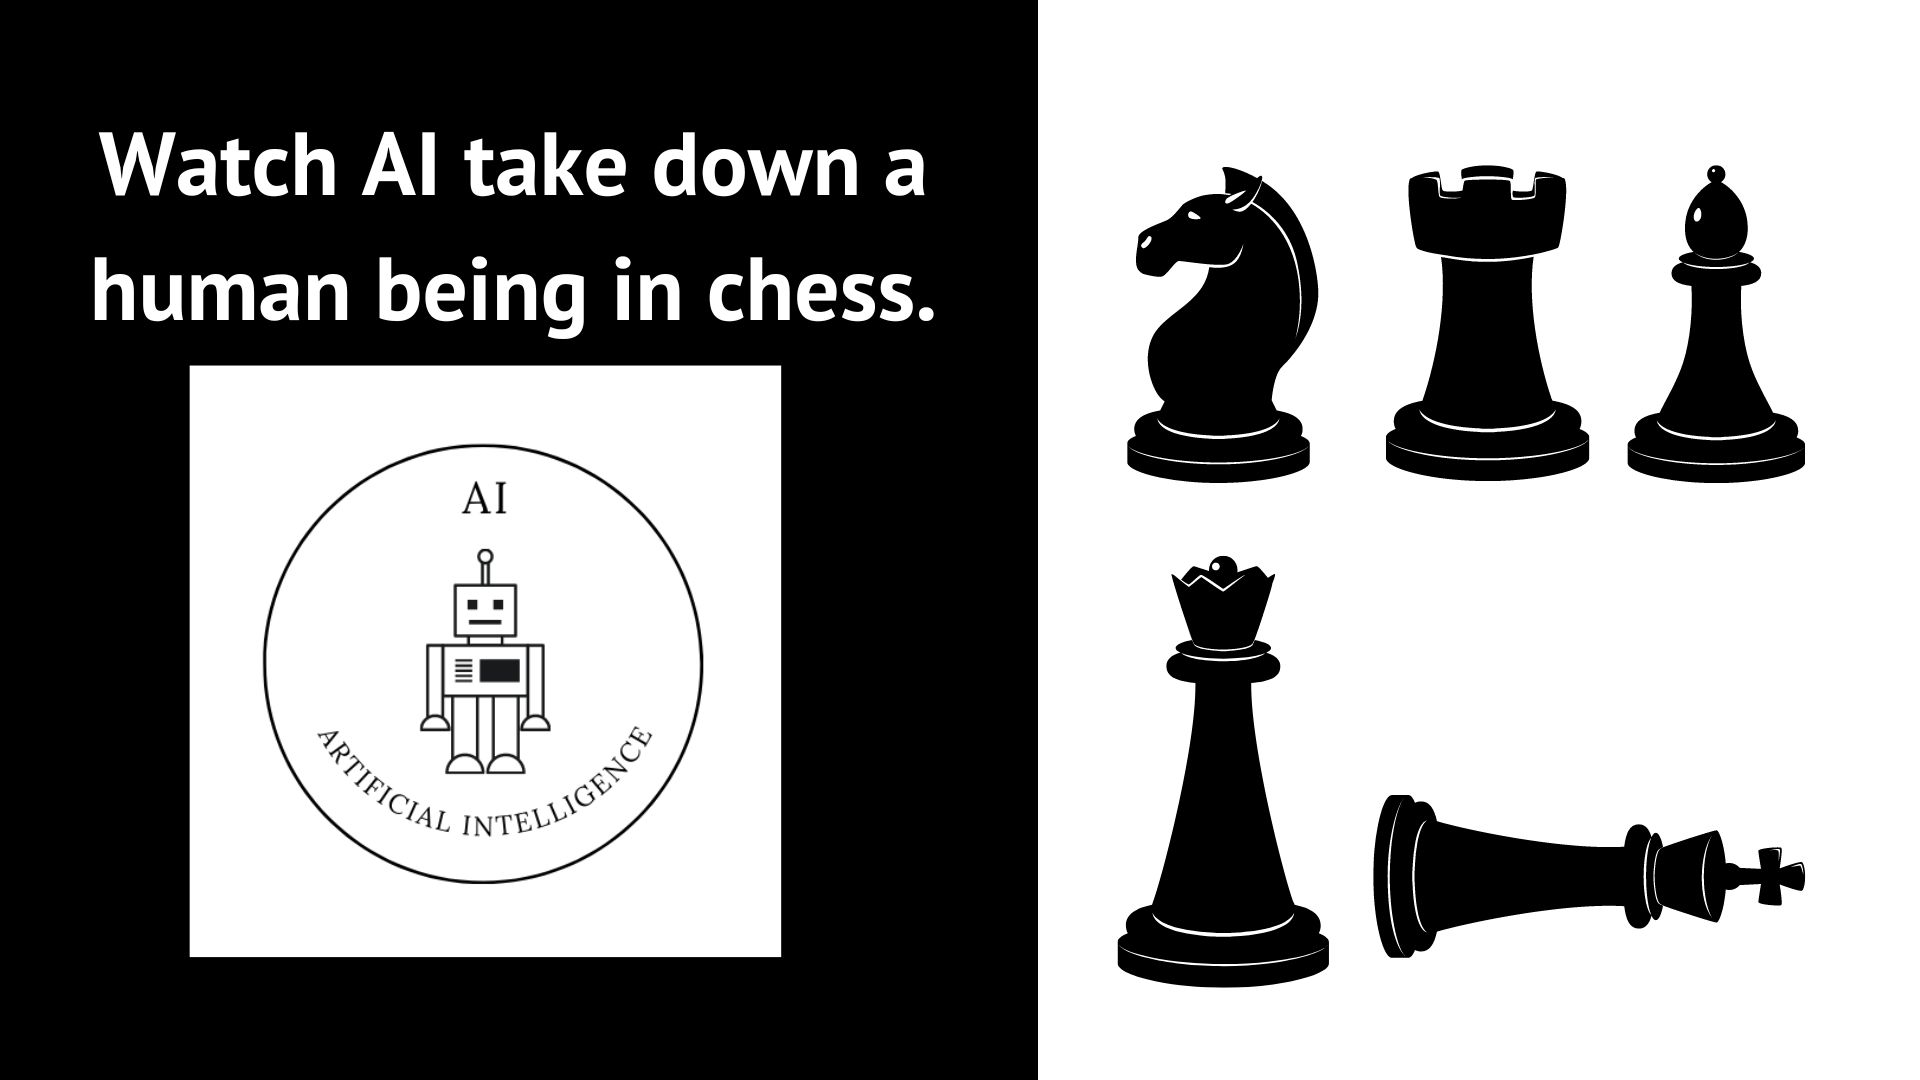 Watch AI take down a human being in chess.